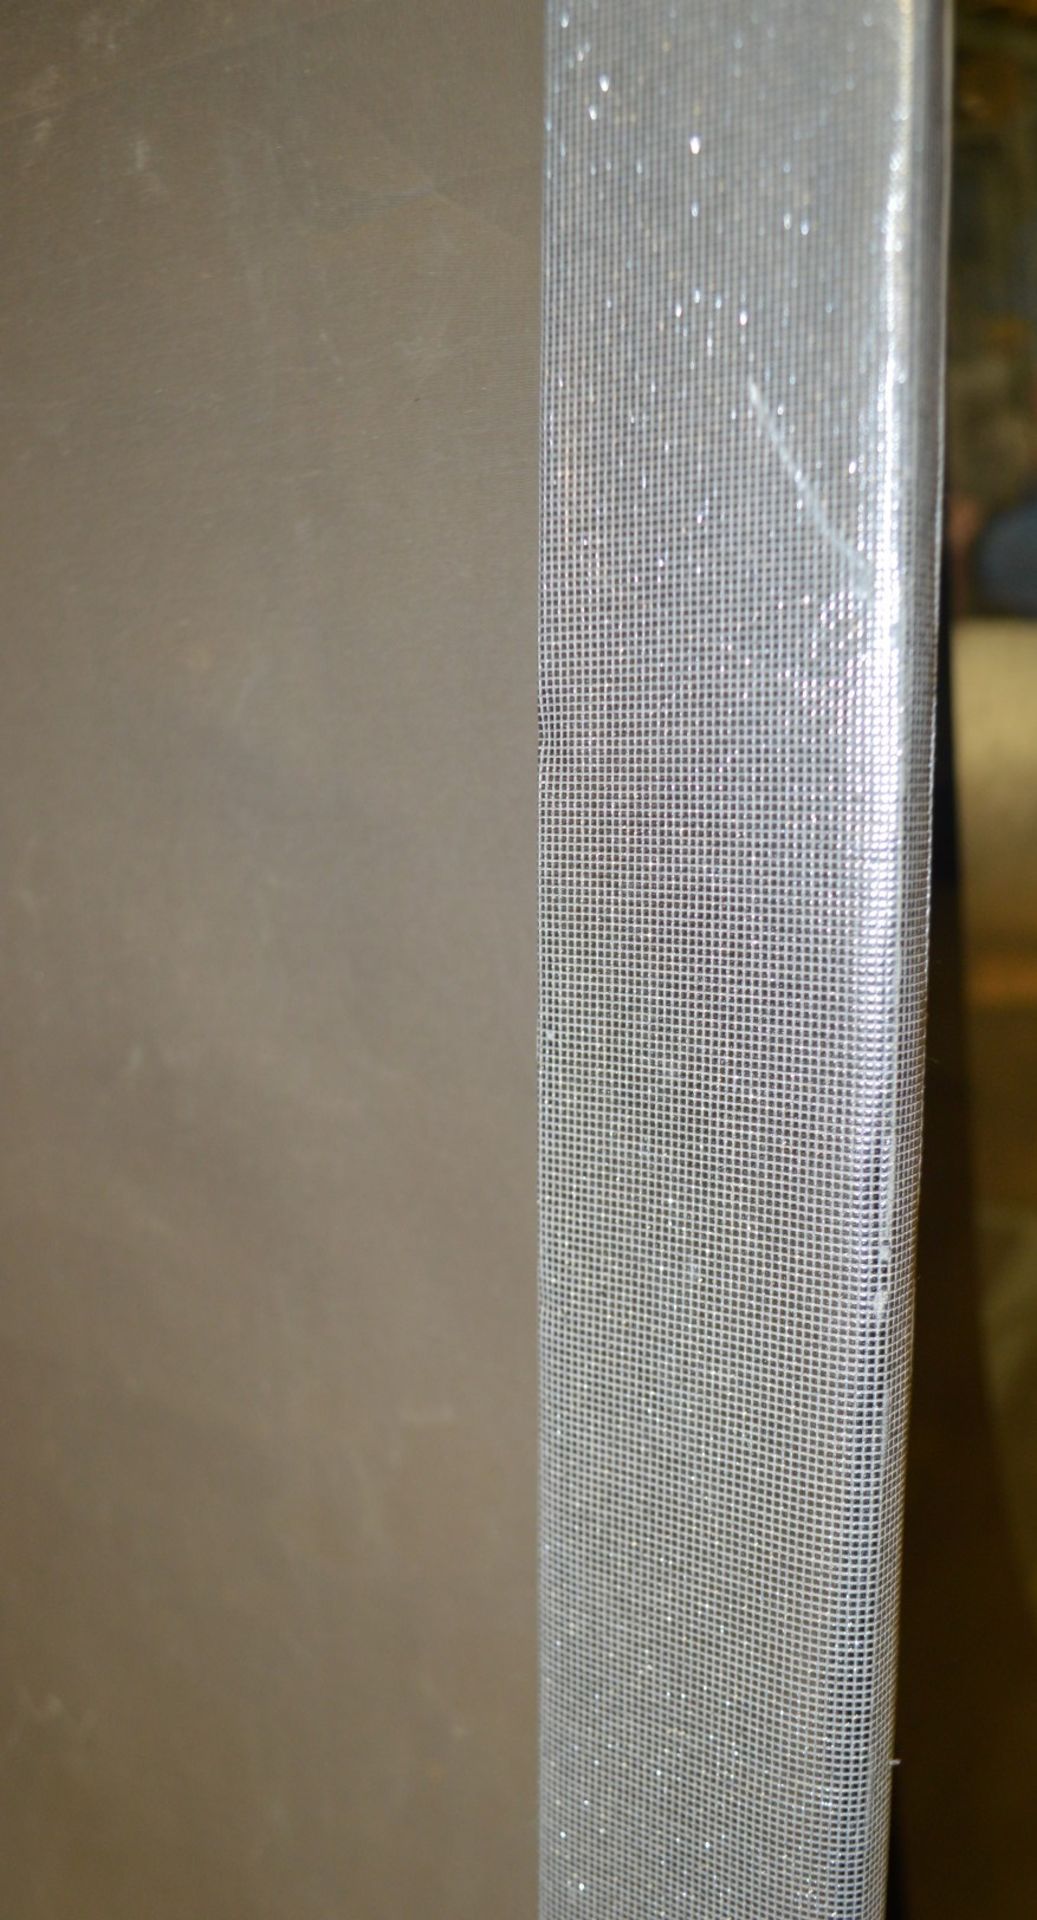 1 x Oblong-Shaped Silver Inset Upholstered Frame Lined With A Shimmering Silk Style Fabric - Image 3 of 6